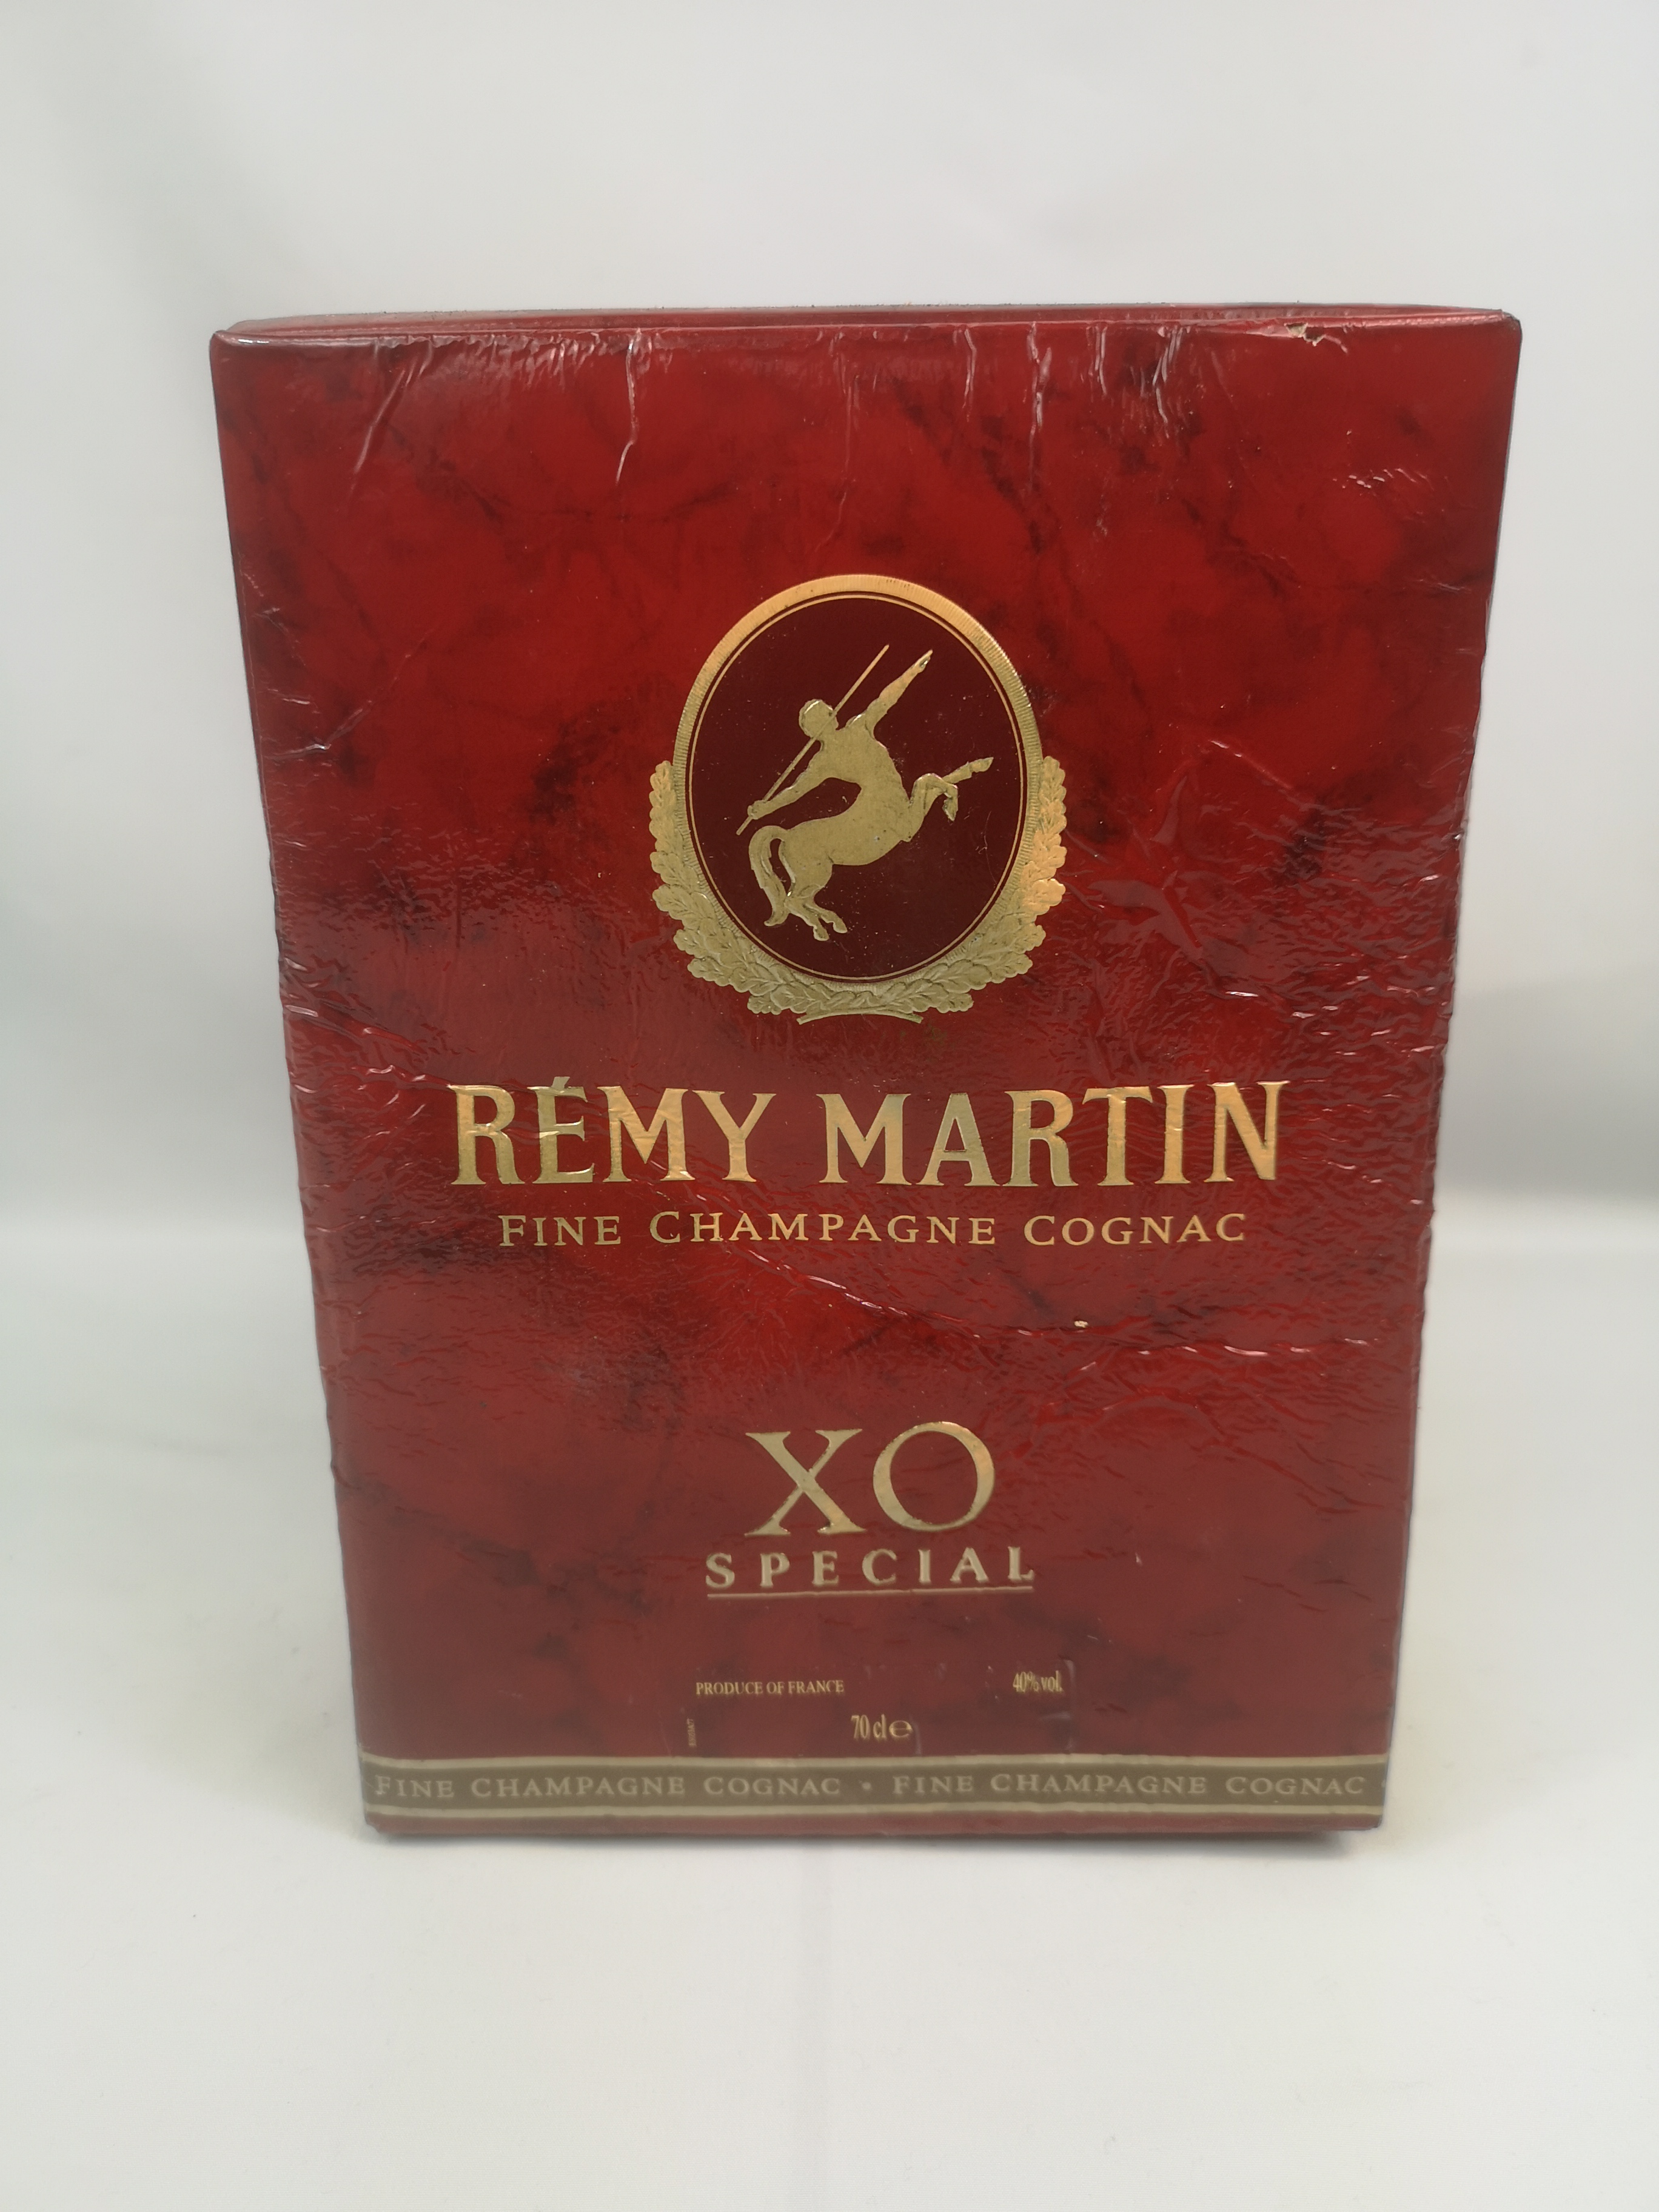 70cl bottle of Remy Martin XO special cognac - Image 3 of 10